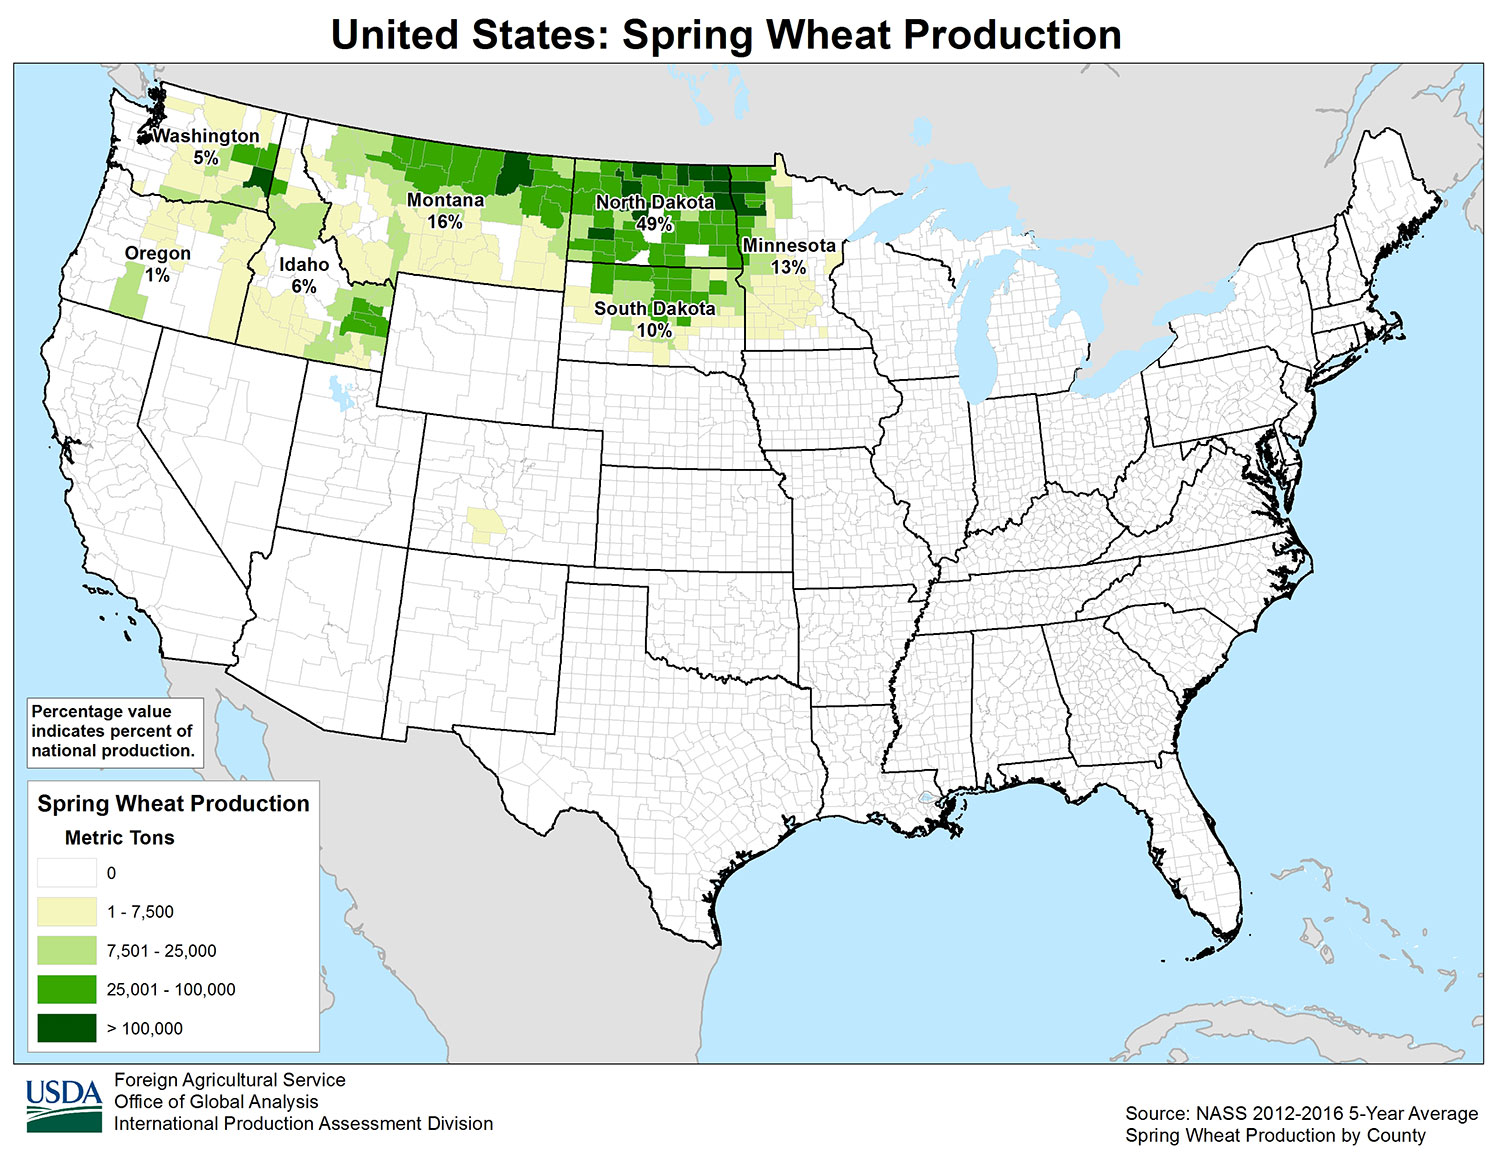 USDA Spring Wheat Production in the United States